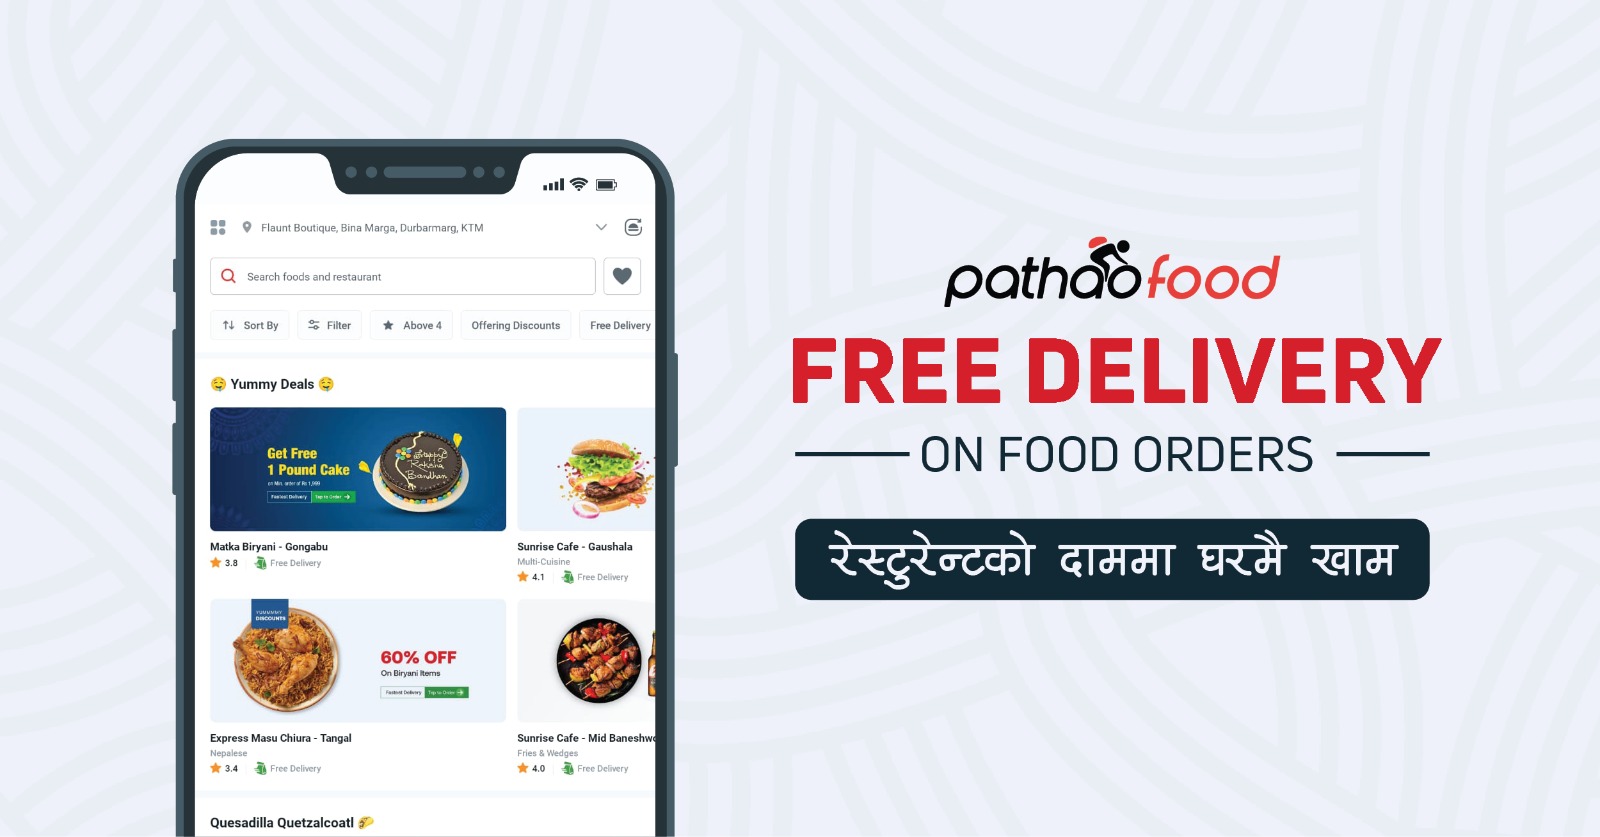 Pathao app launches free food delivery service